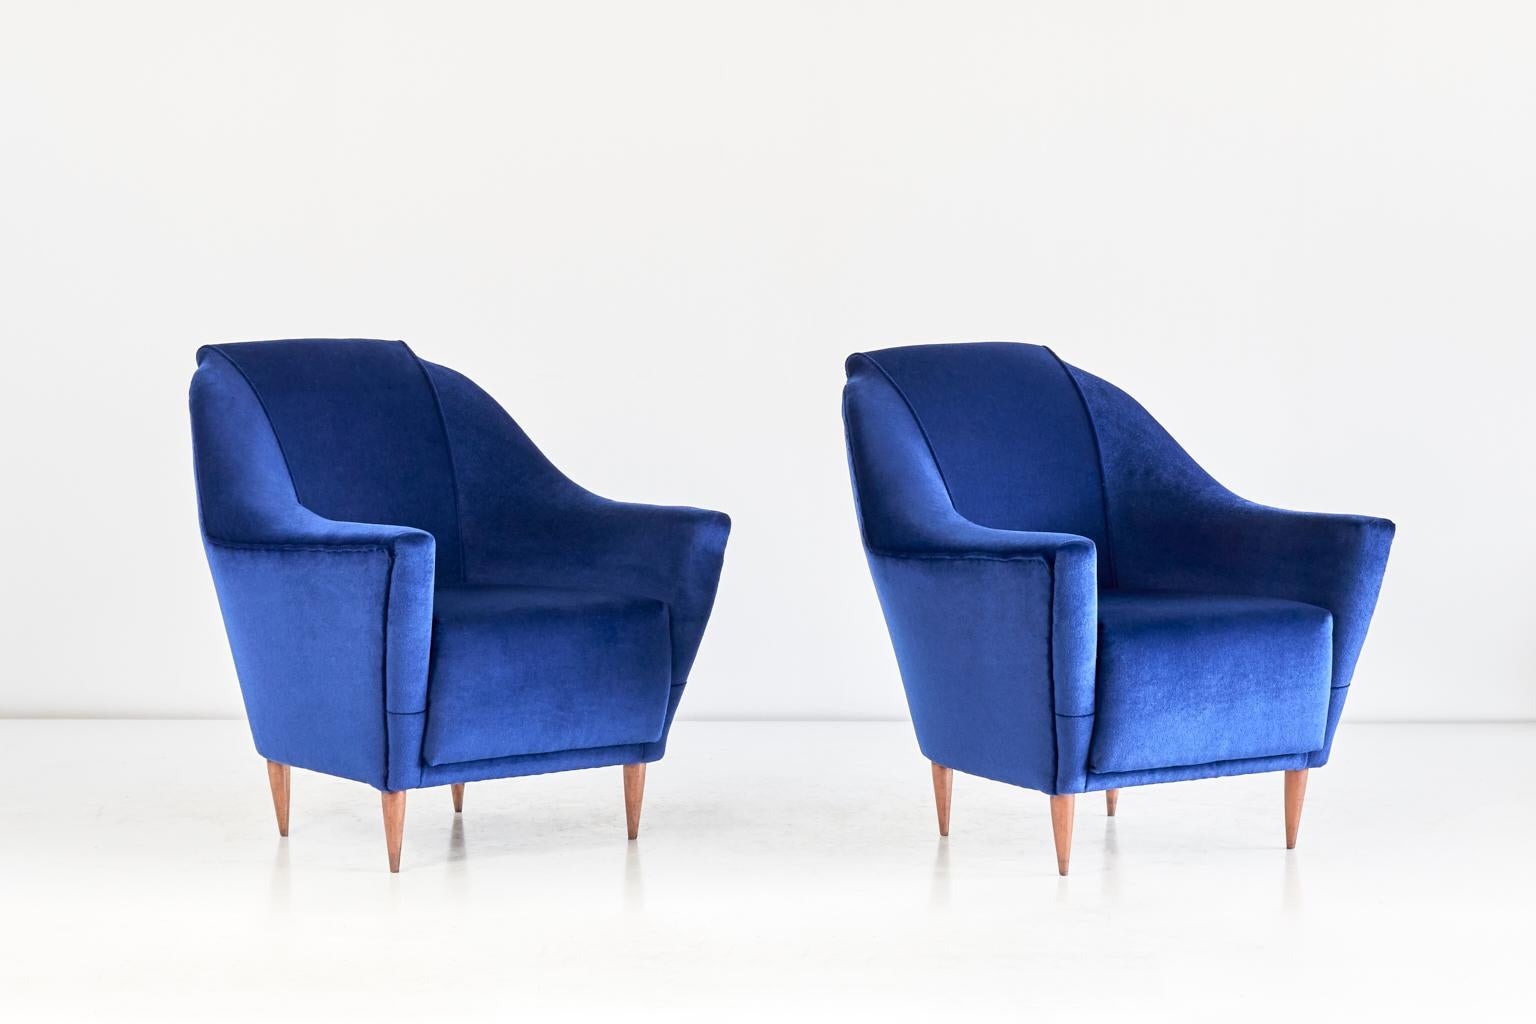 Mid-Century Modern Pair of Ico Parisi Armchairs in Blue Velvet for Ariberto Colombo, Italy, 1951 For Sale